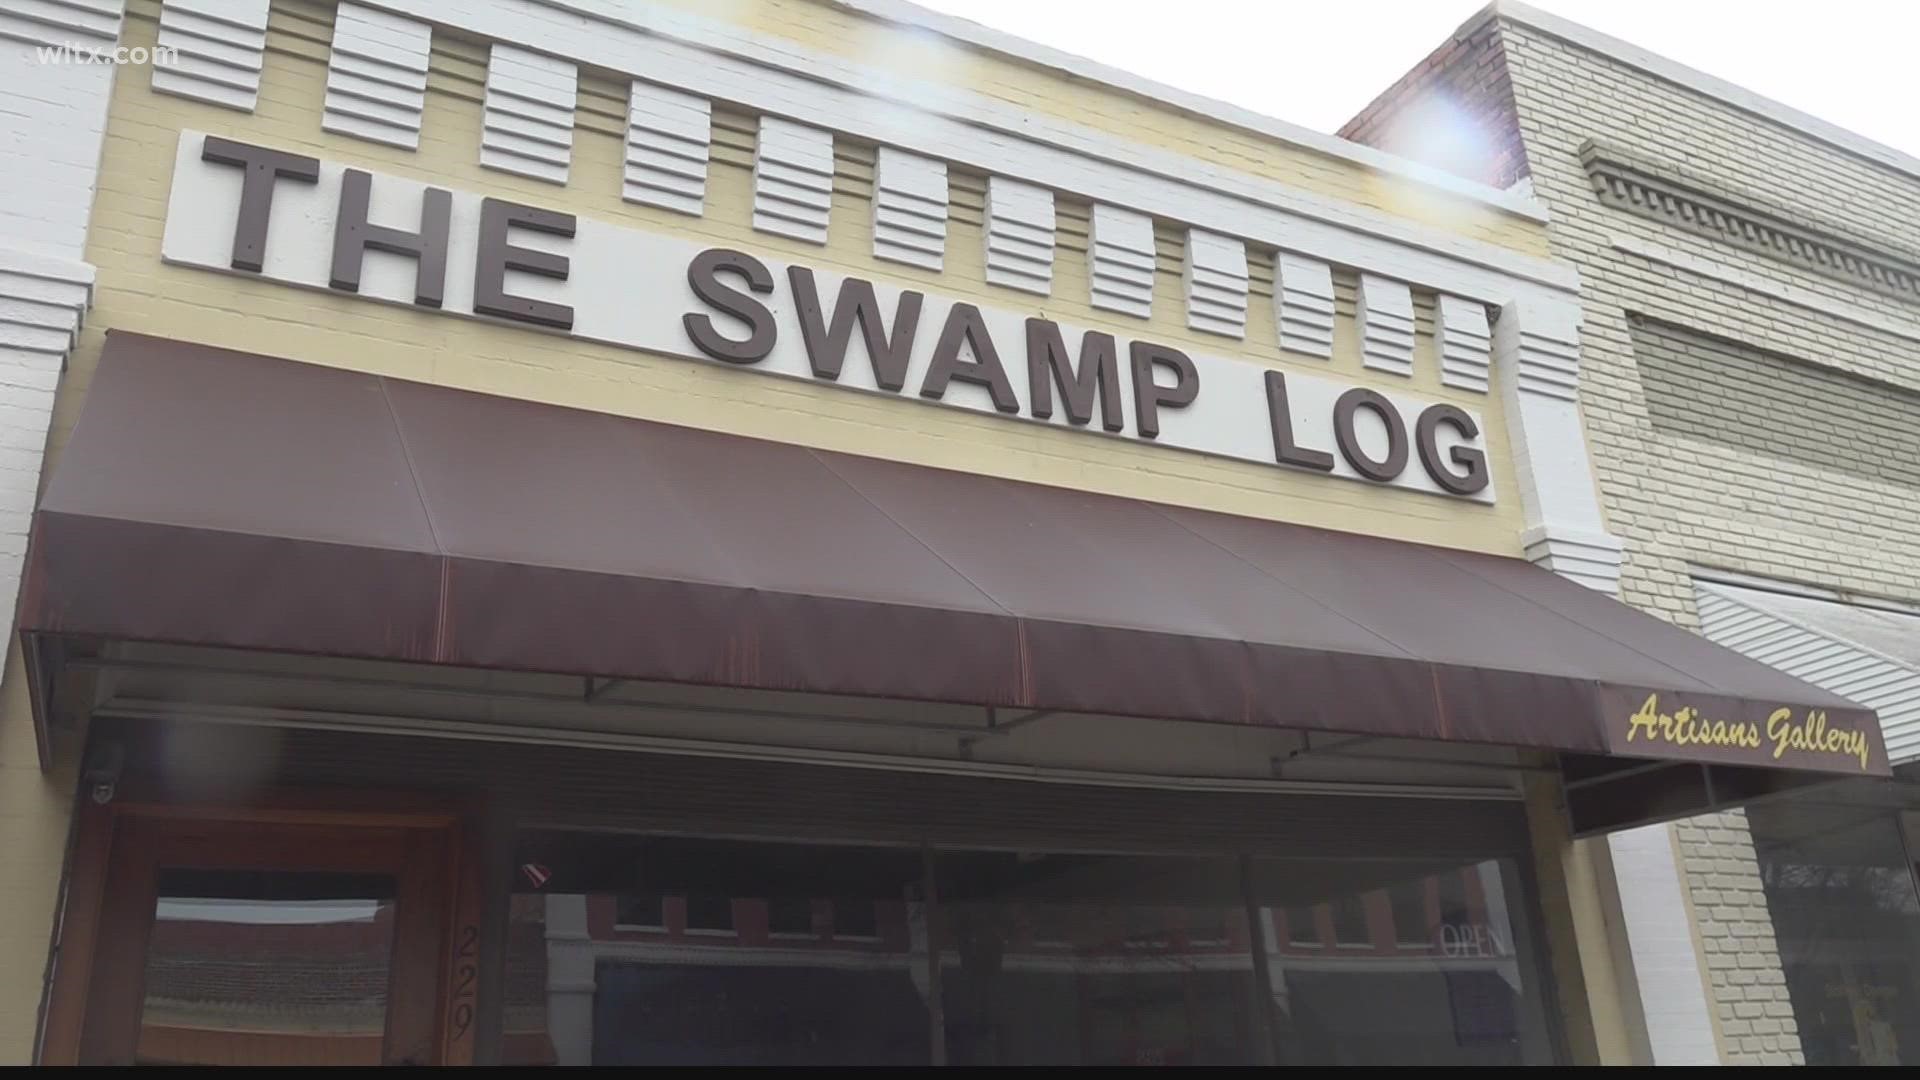 The Swamp Log is a popular gallery on Main Street that was helped revitalize downtown Bishopville. While it's now closed, there are plans for the empty space.